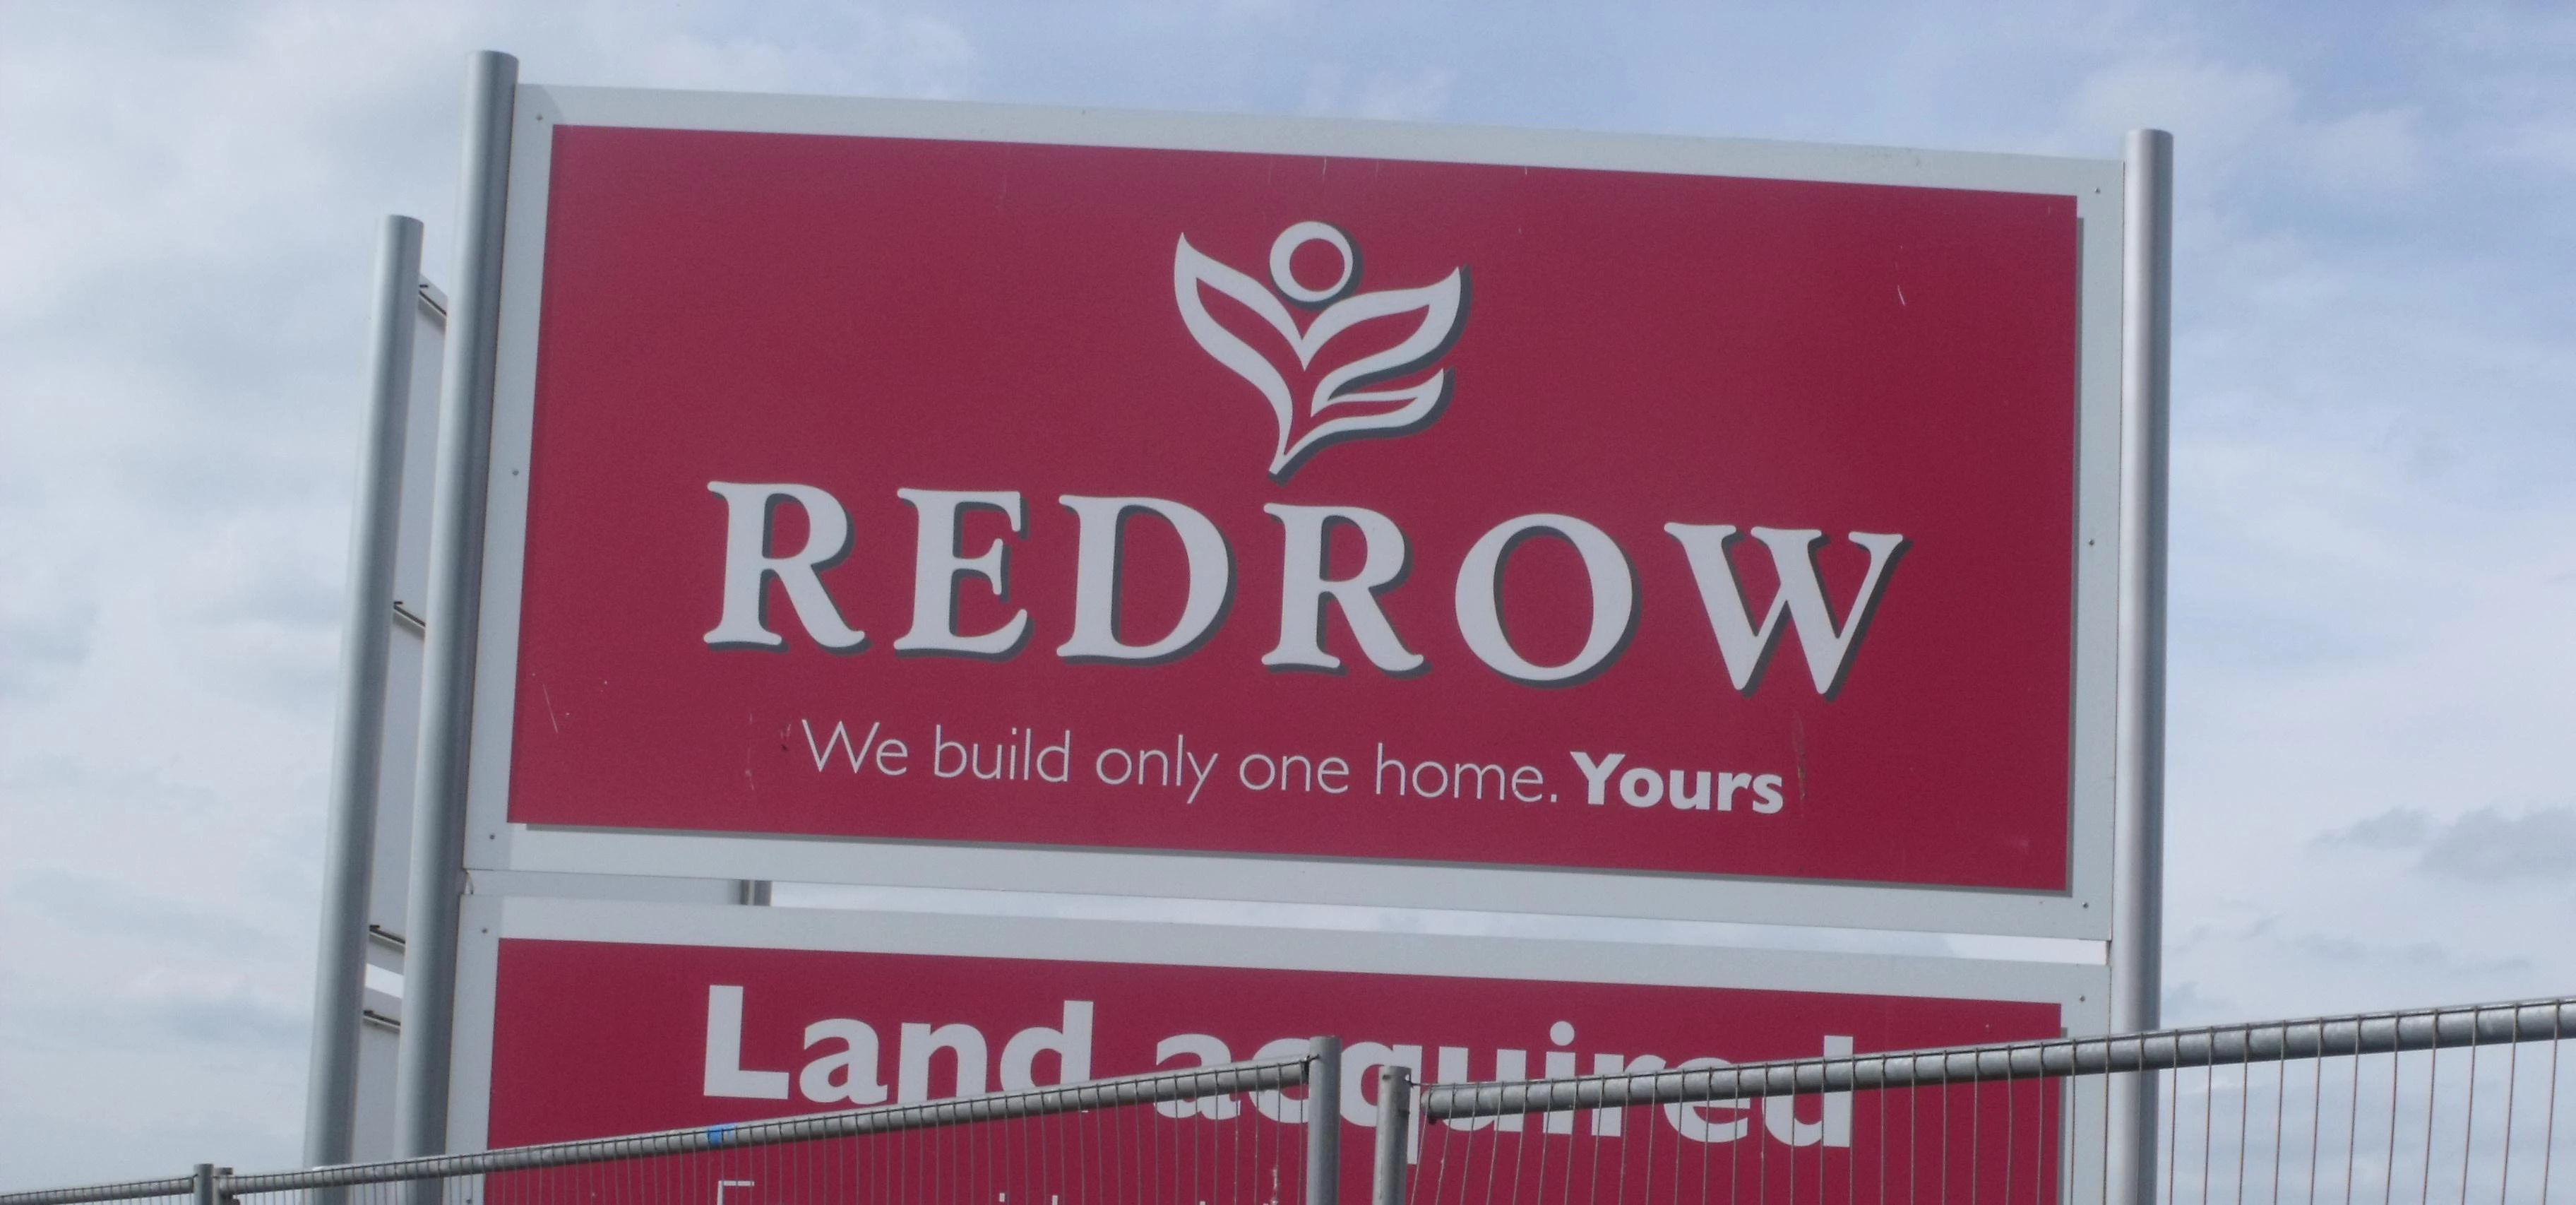 Site of the former cattle market near Stratford upon Avon Station - Redrow sign